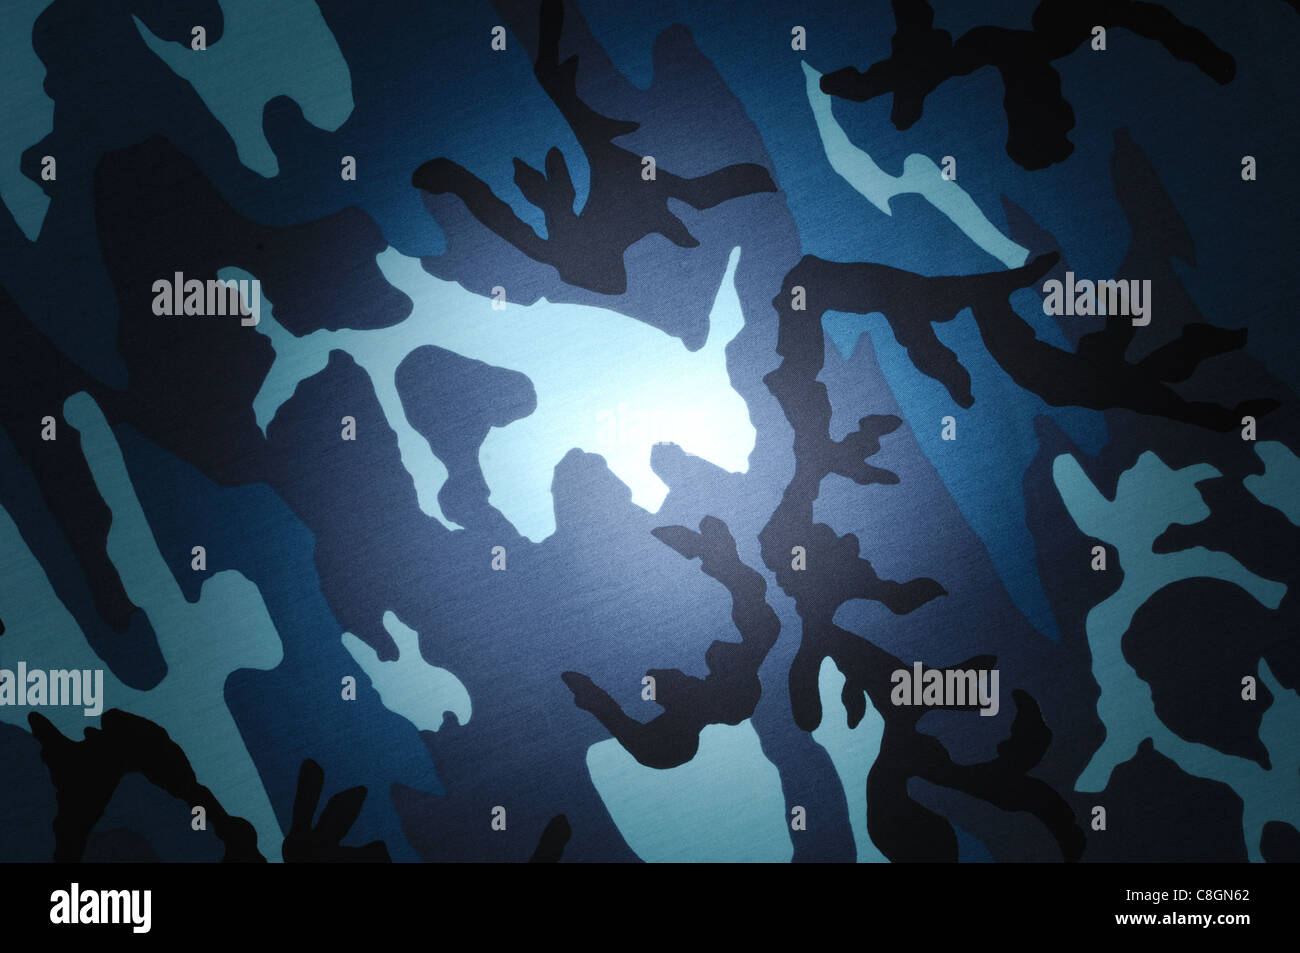 Spotlighting on shades of blue and black camouflage material Stock Photo